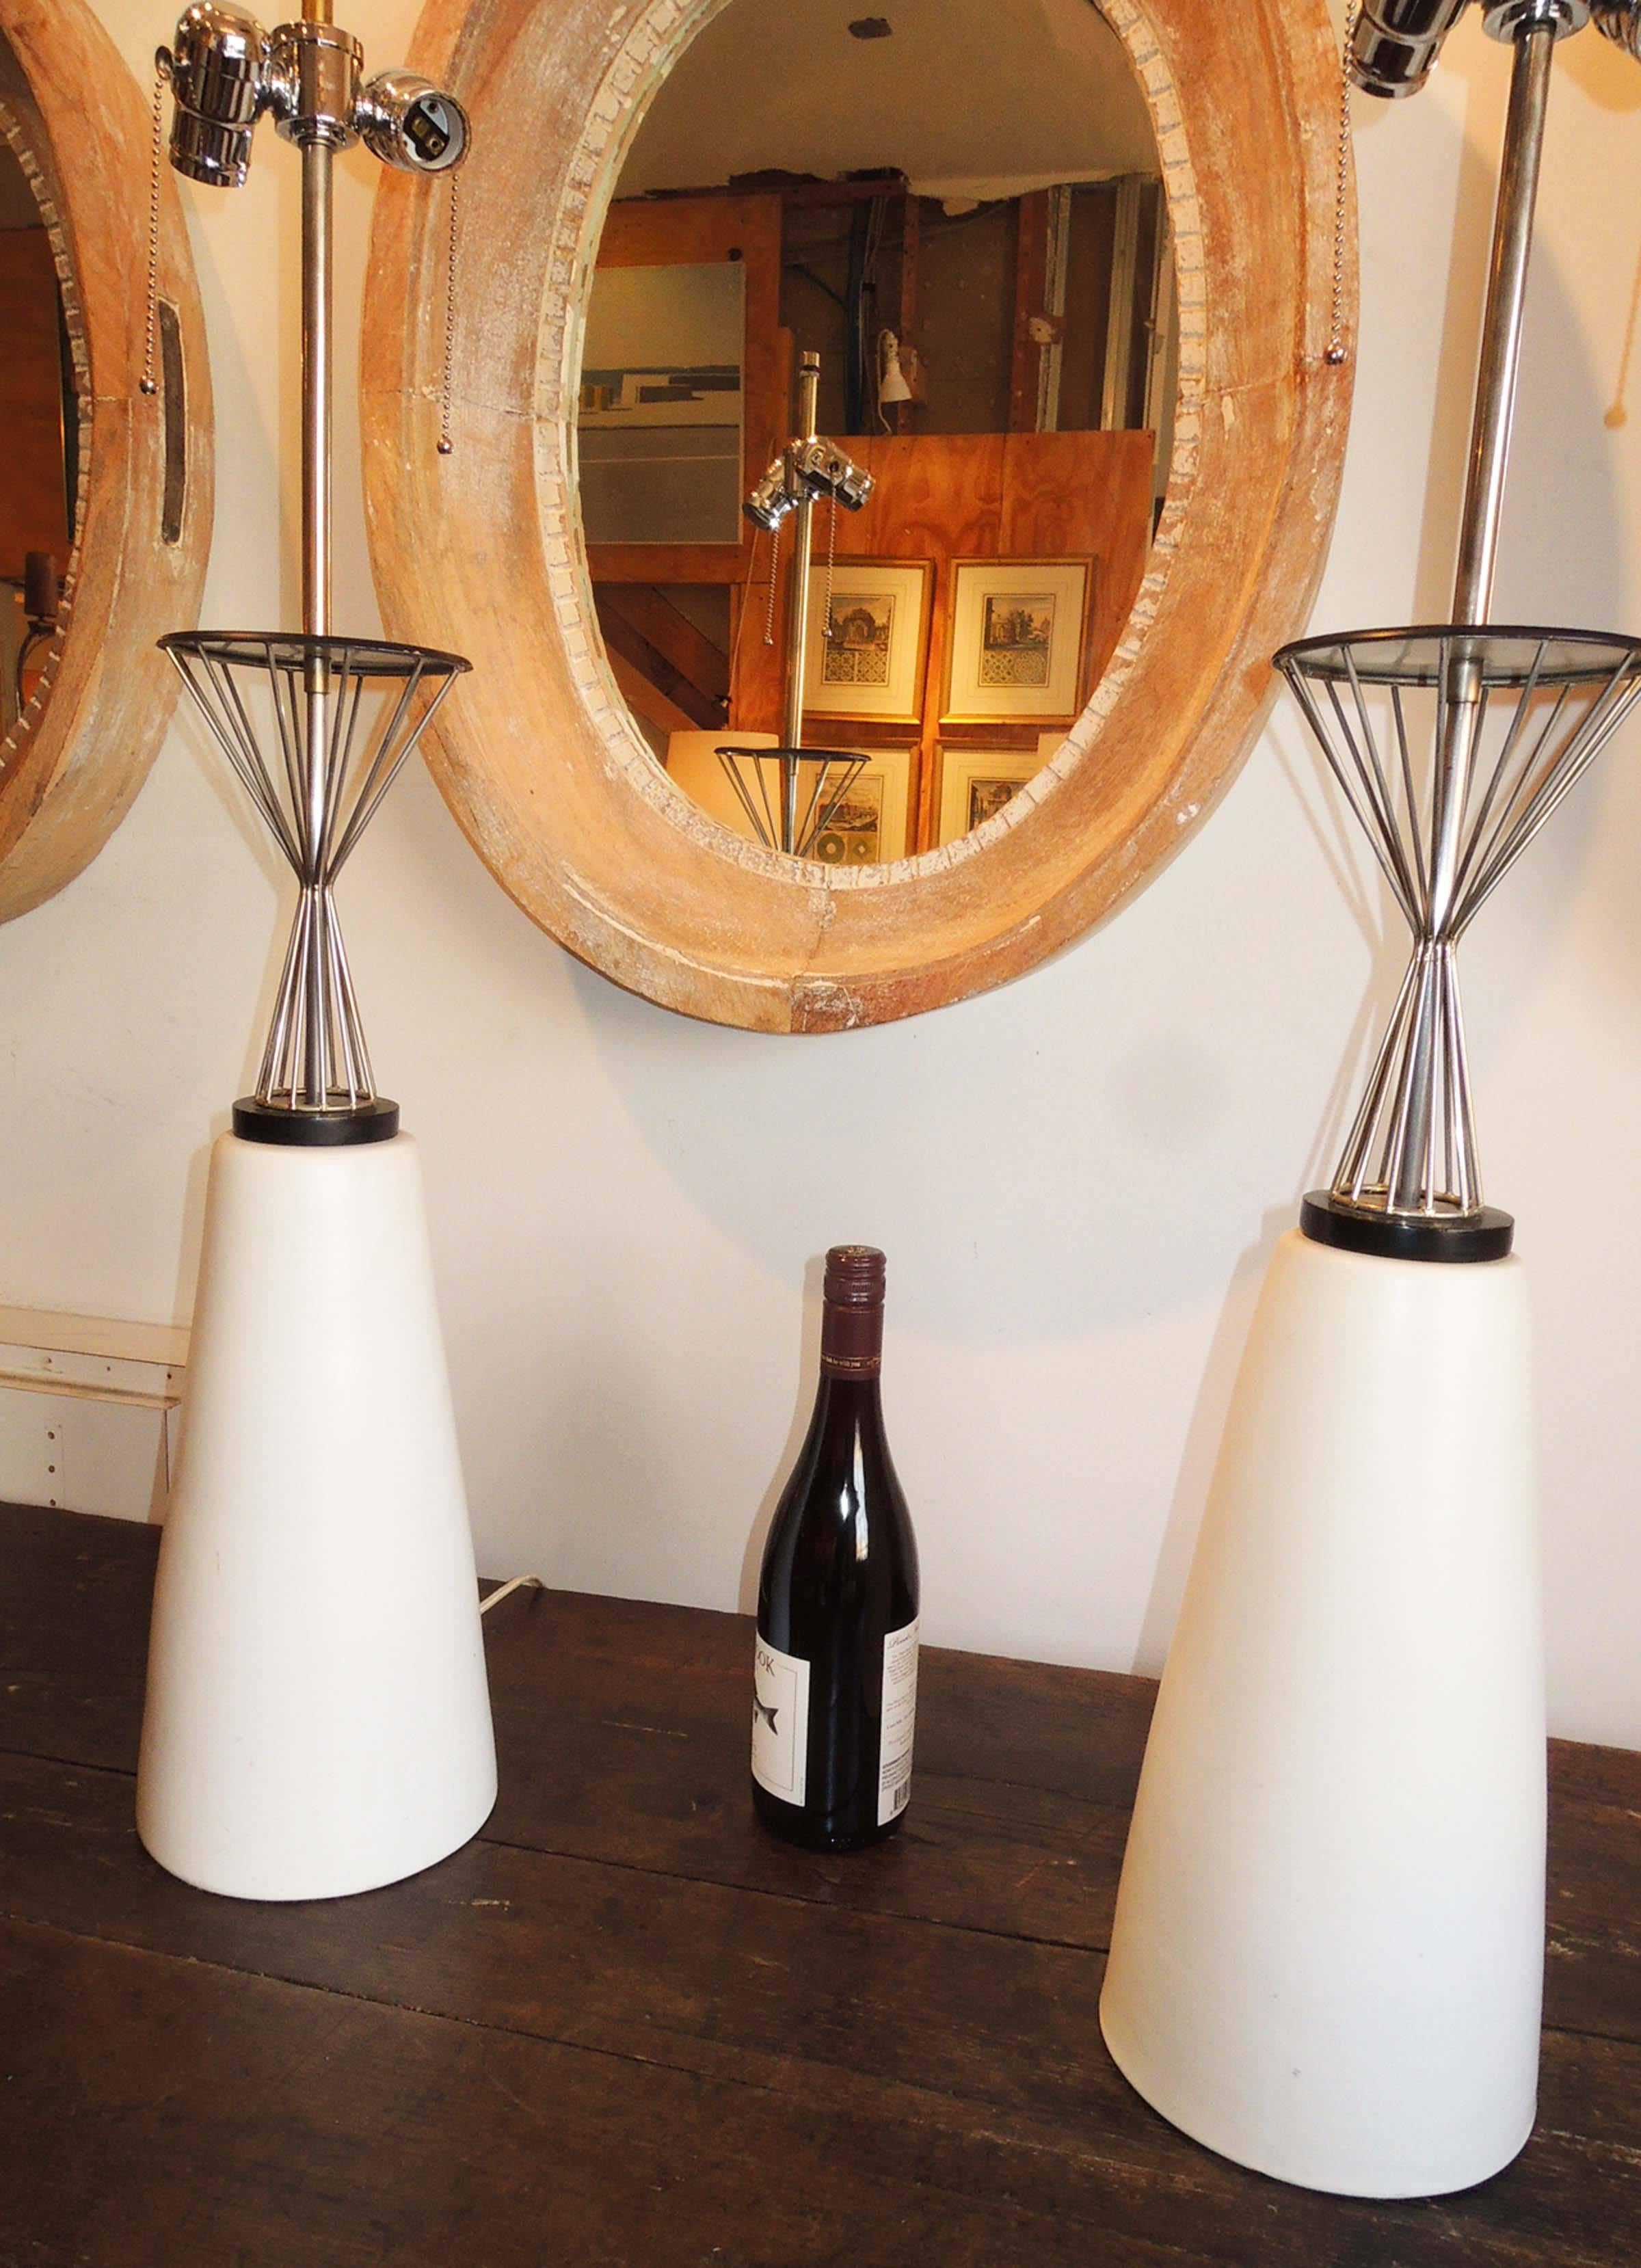 Pair of table lamps with white ceramic cone base topped by a steel corseted top.
Lamp base measures 20